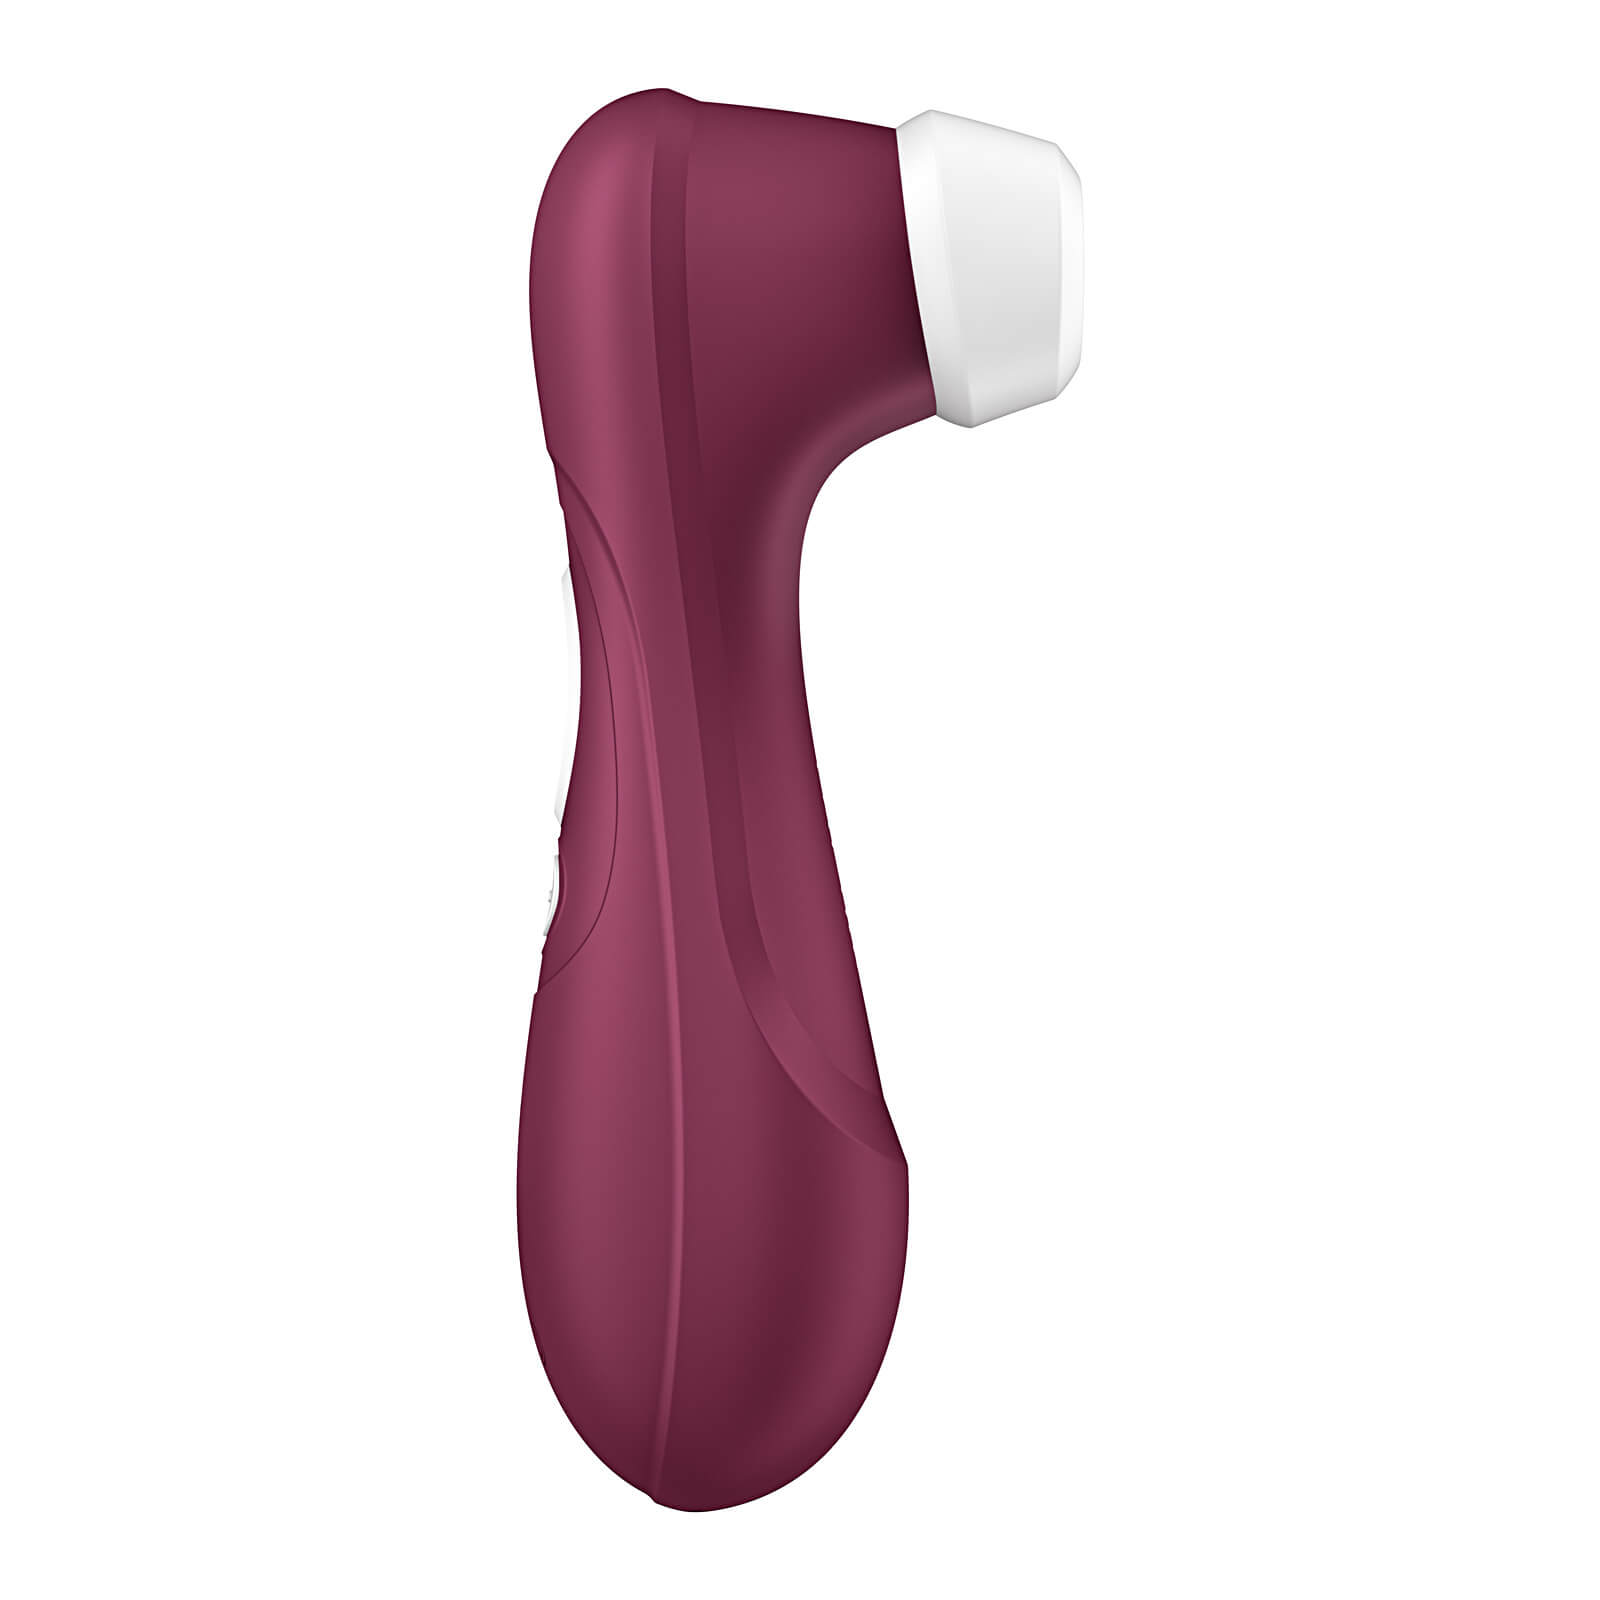 Satisfyer Pro 2 Generation 3 with App (Wine Red), Liquid Air vibrátor